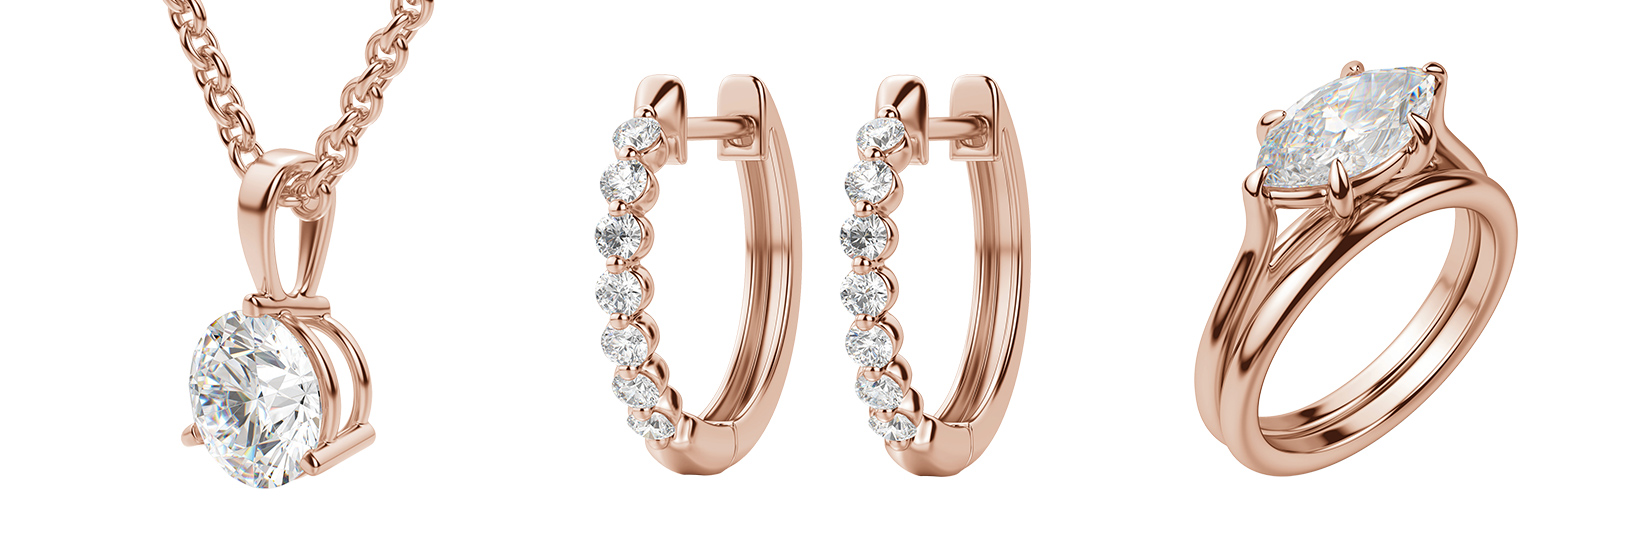 Rose gold fine jewelry & rose gold engagement rings